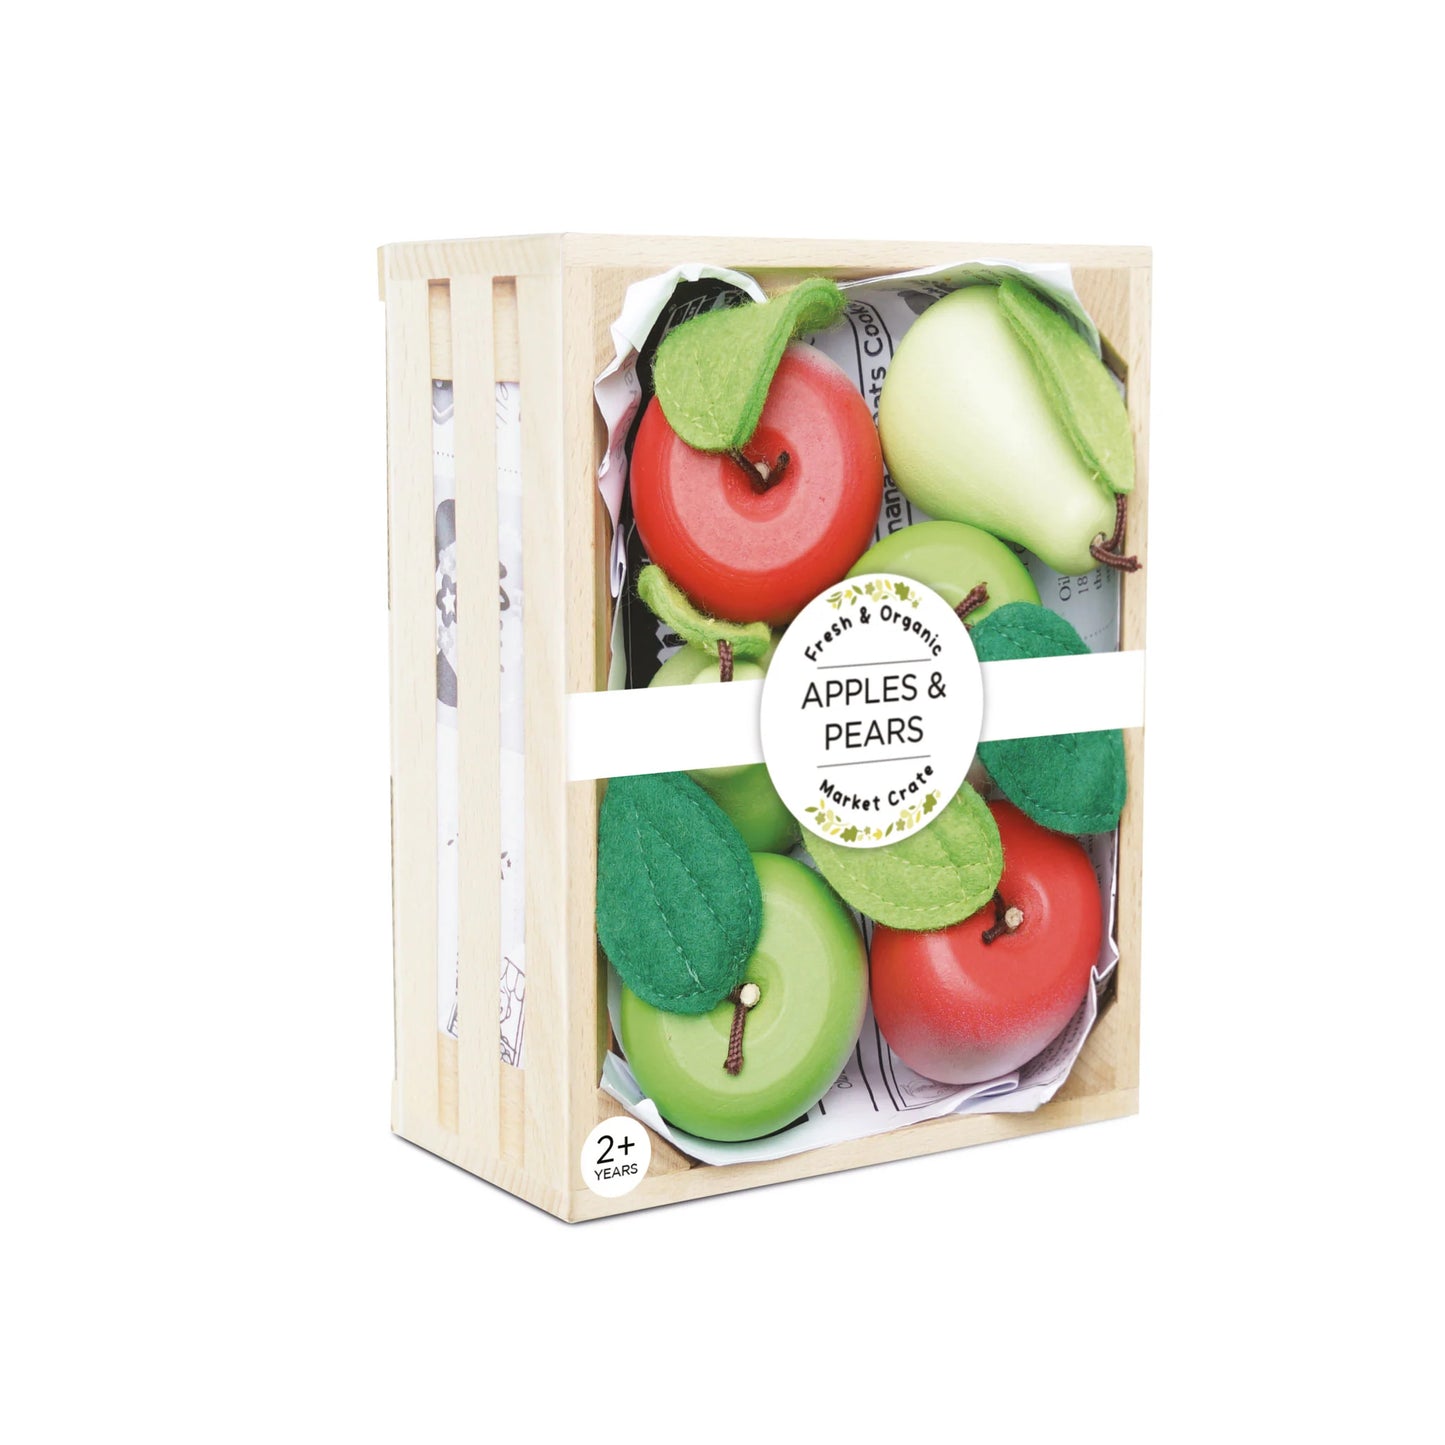 Orchard Fruits Wooden Market Crate - Wooden Toy Food by Le Toy Van